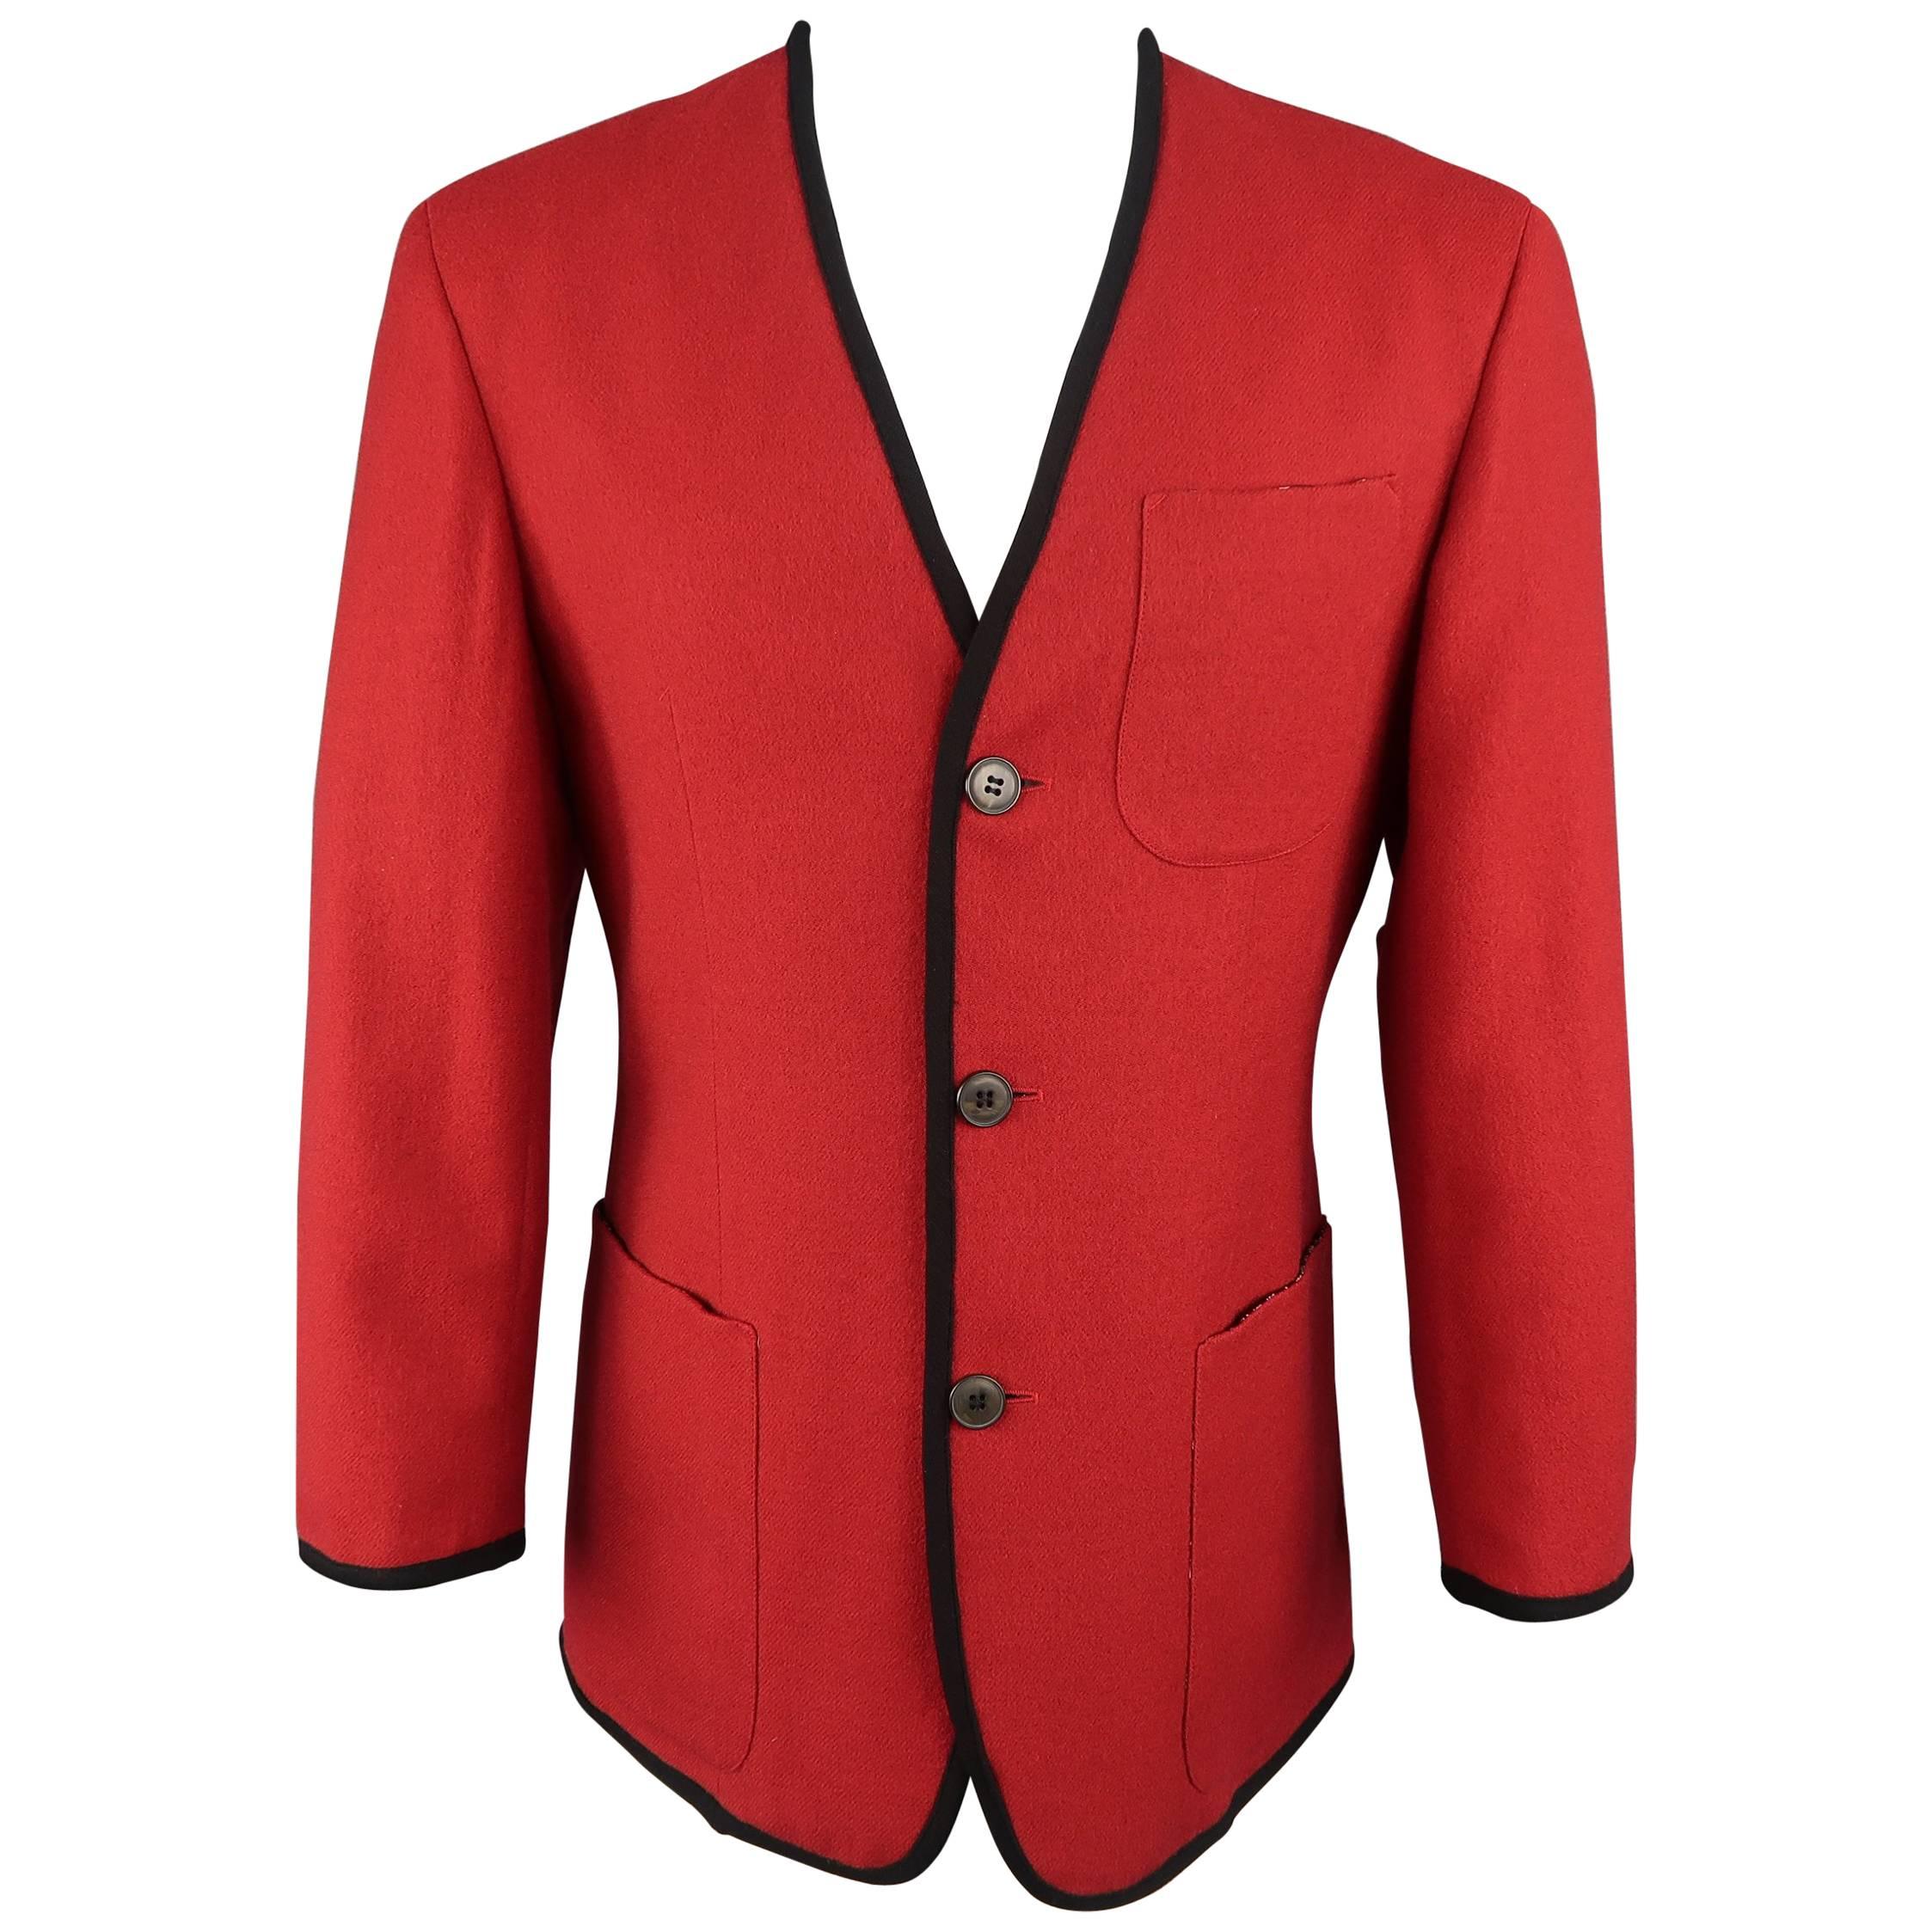 Jean Paul Gaultier Men's Red and Black Wool V Neck Collarless Jacket